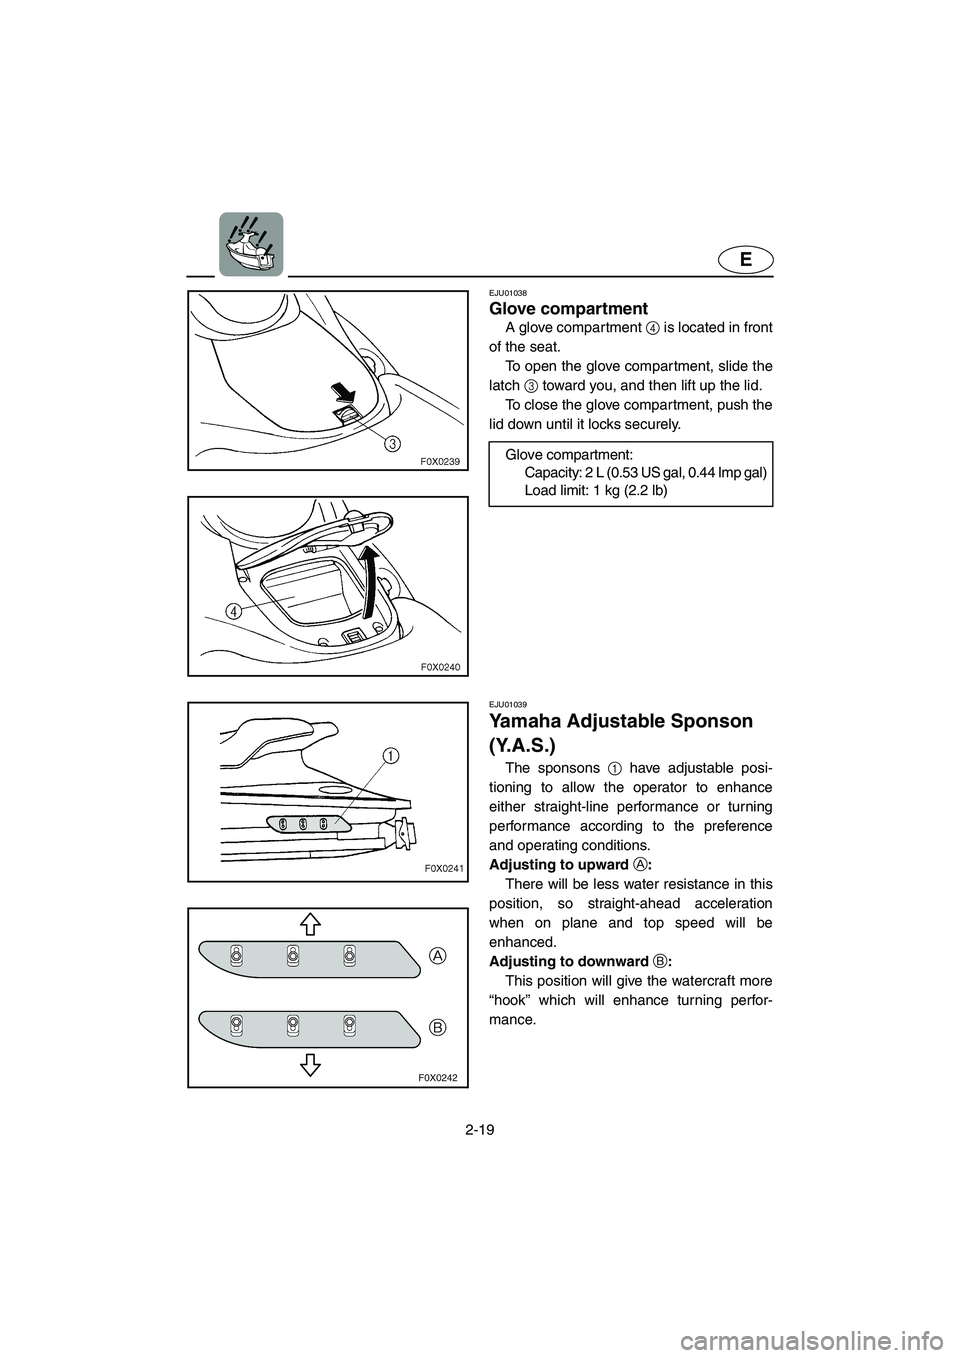 YAMAHA GP800R 2002 Service Manual 2-19
E
EJU01038 
Glove compartment  
A glove compartment 4 is located in front
of the seat. 
To open the glove compartment, slide the
latch 3 toward you, and then lift up the lid. 
To close the glove 